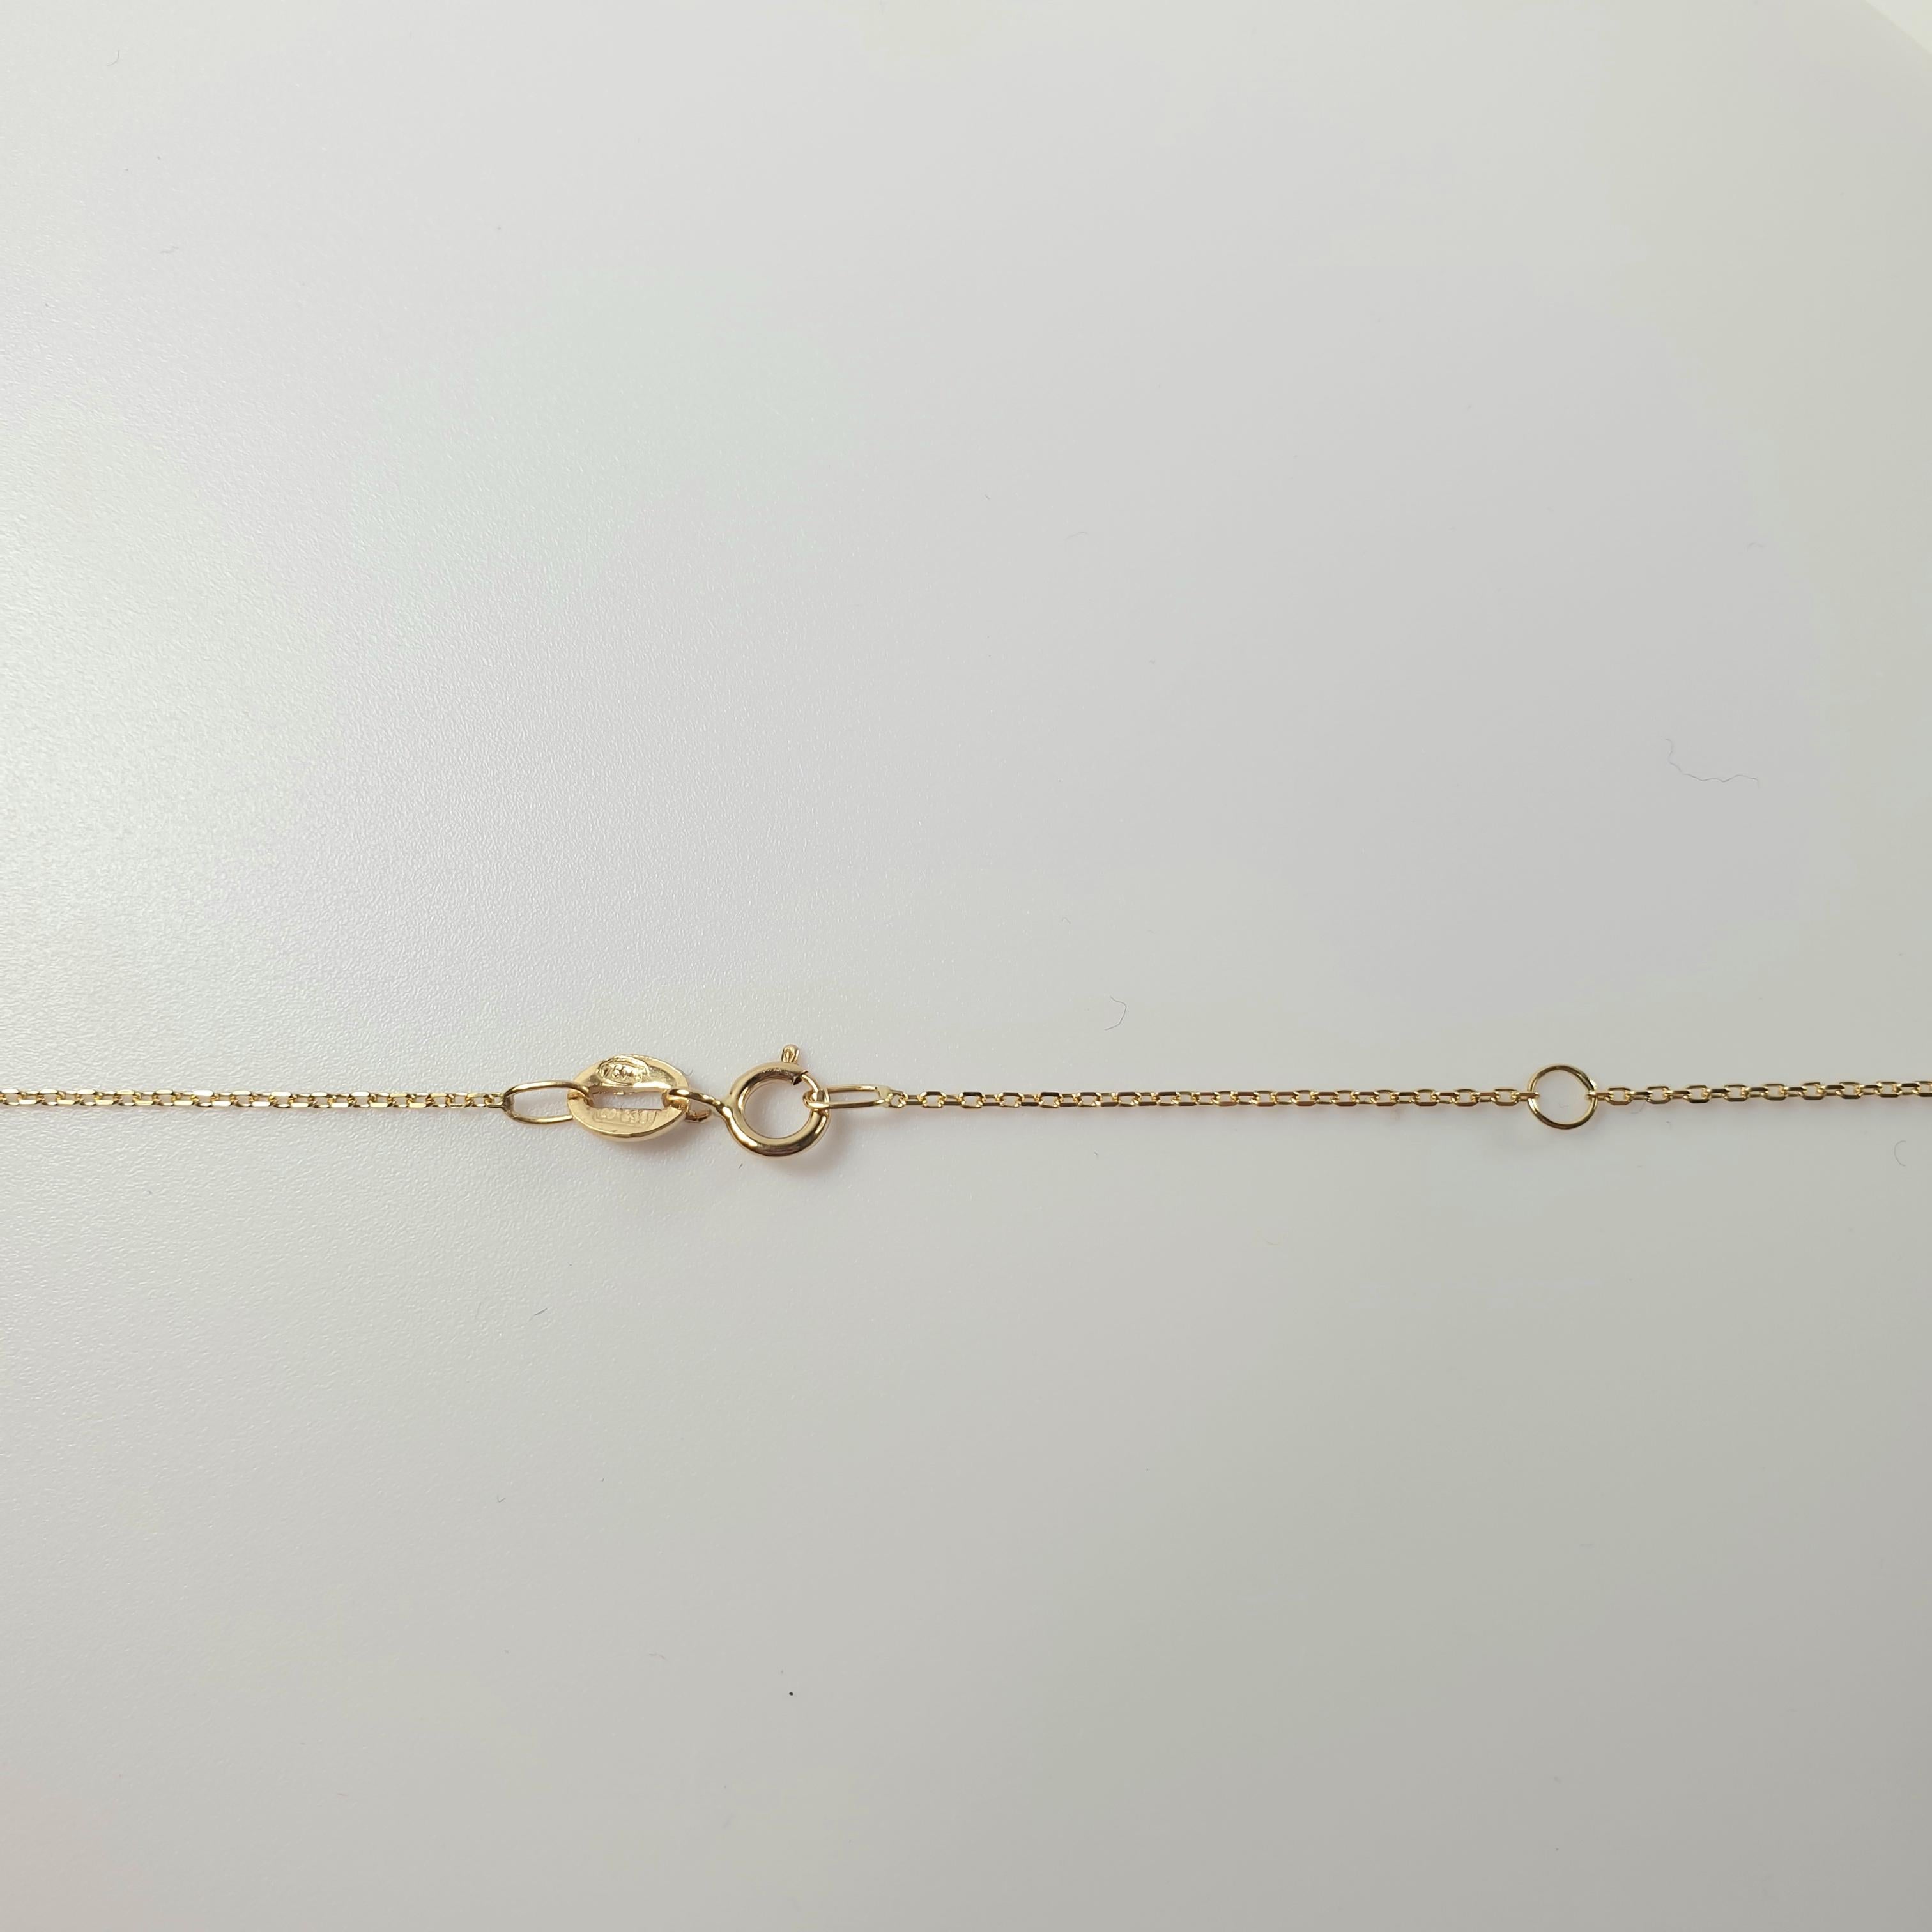 18 Karat Yellow Gold Chain with Star and White Nacre Pendant For Sale 1